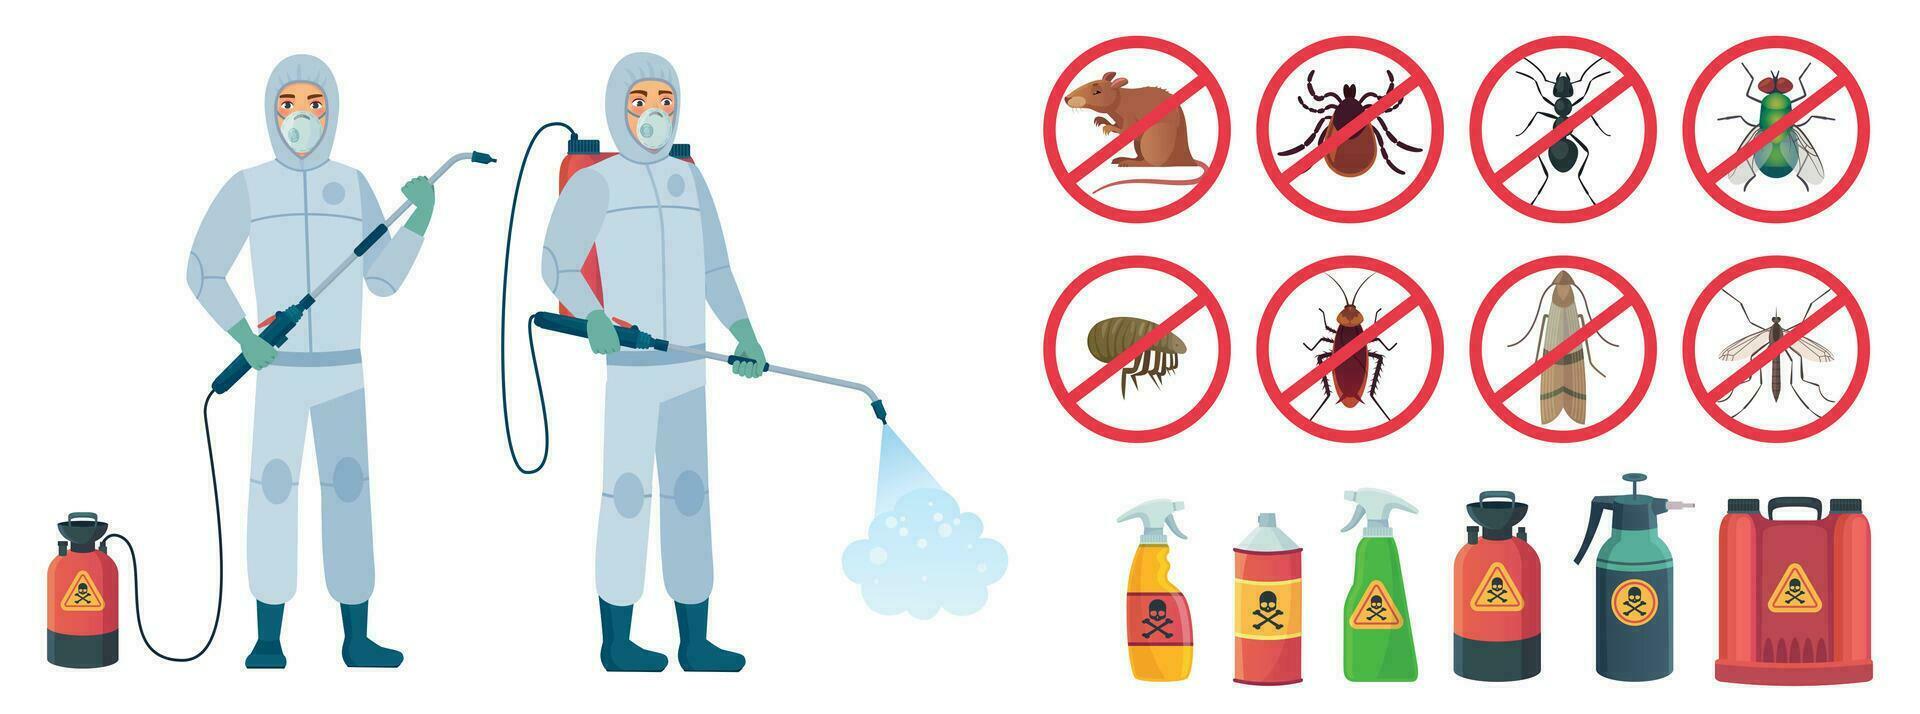 Cartoon disinfector. Disinfectors characters in protective suits with poison spray bottle. Get rid of rats and insects vector illustration set